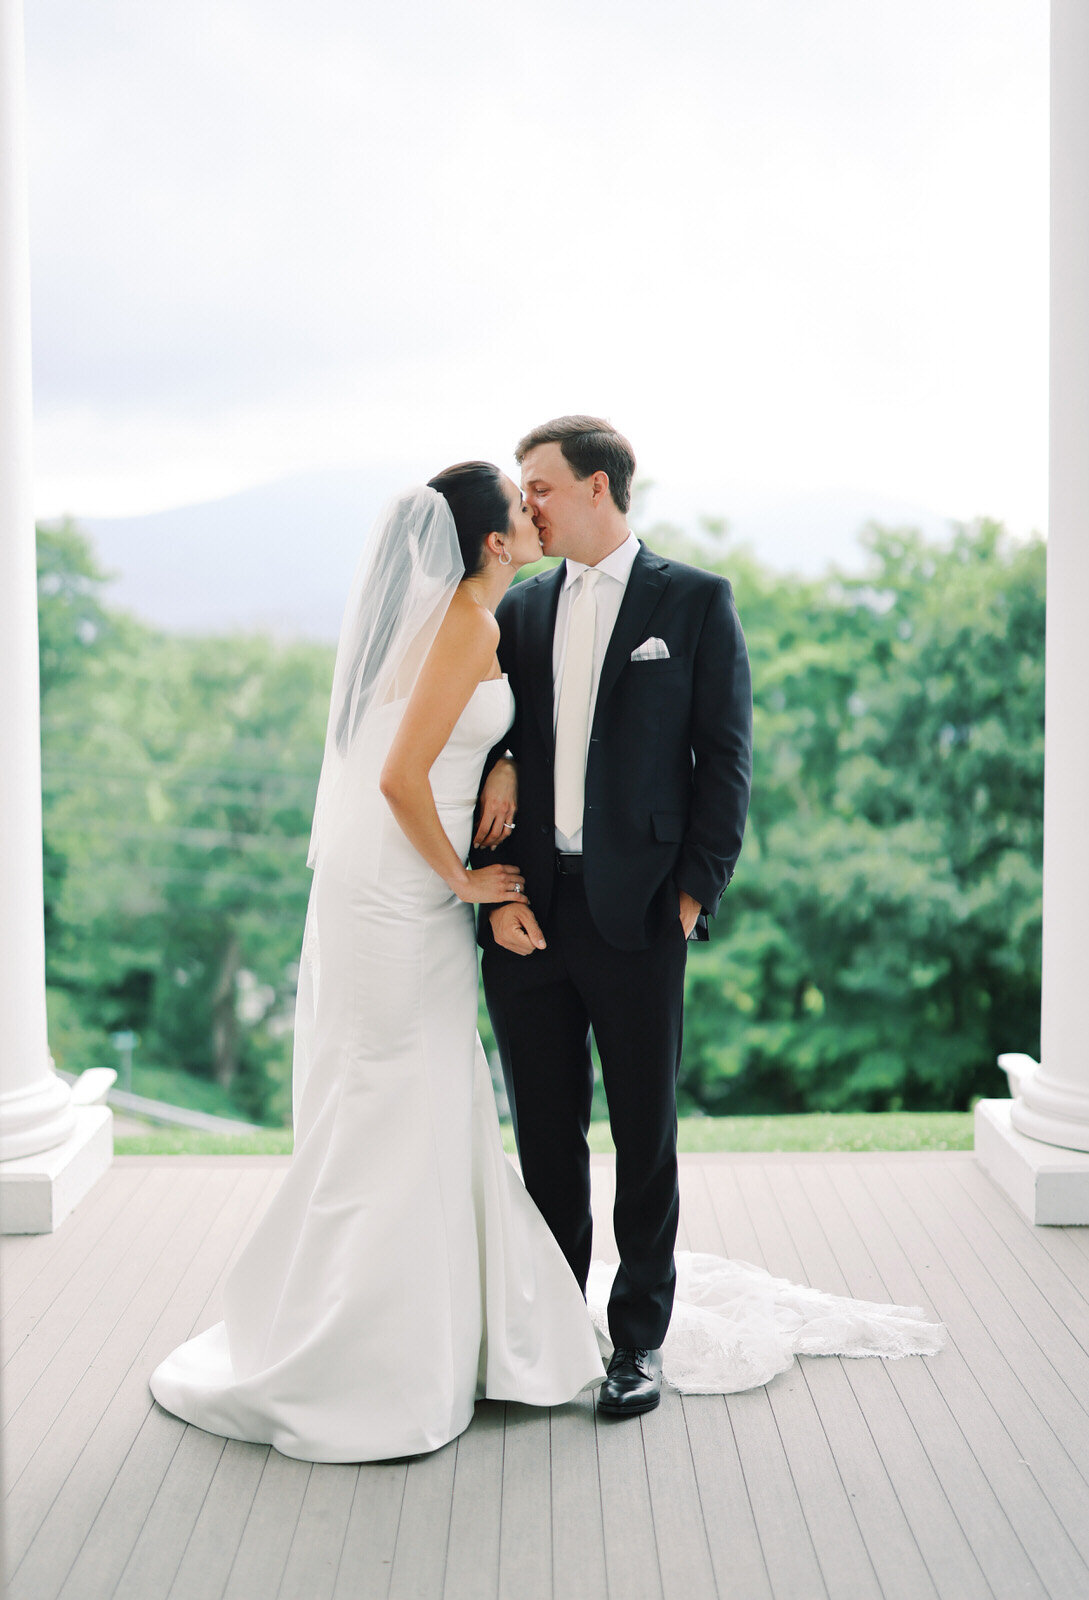 Bright and stylish wedding photography at the classic Westglow Spa in the Blue Ridge Mountains.